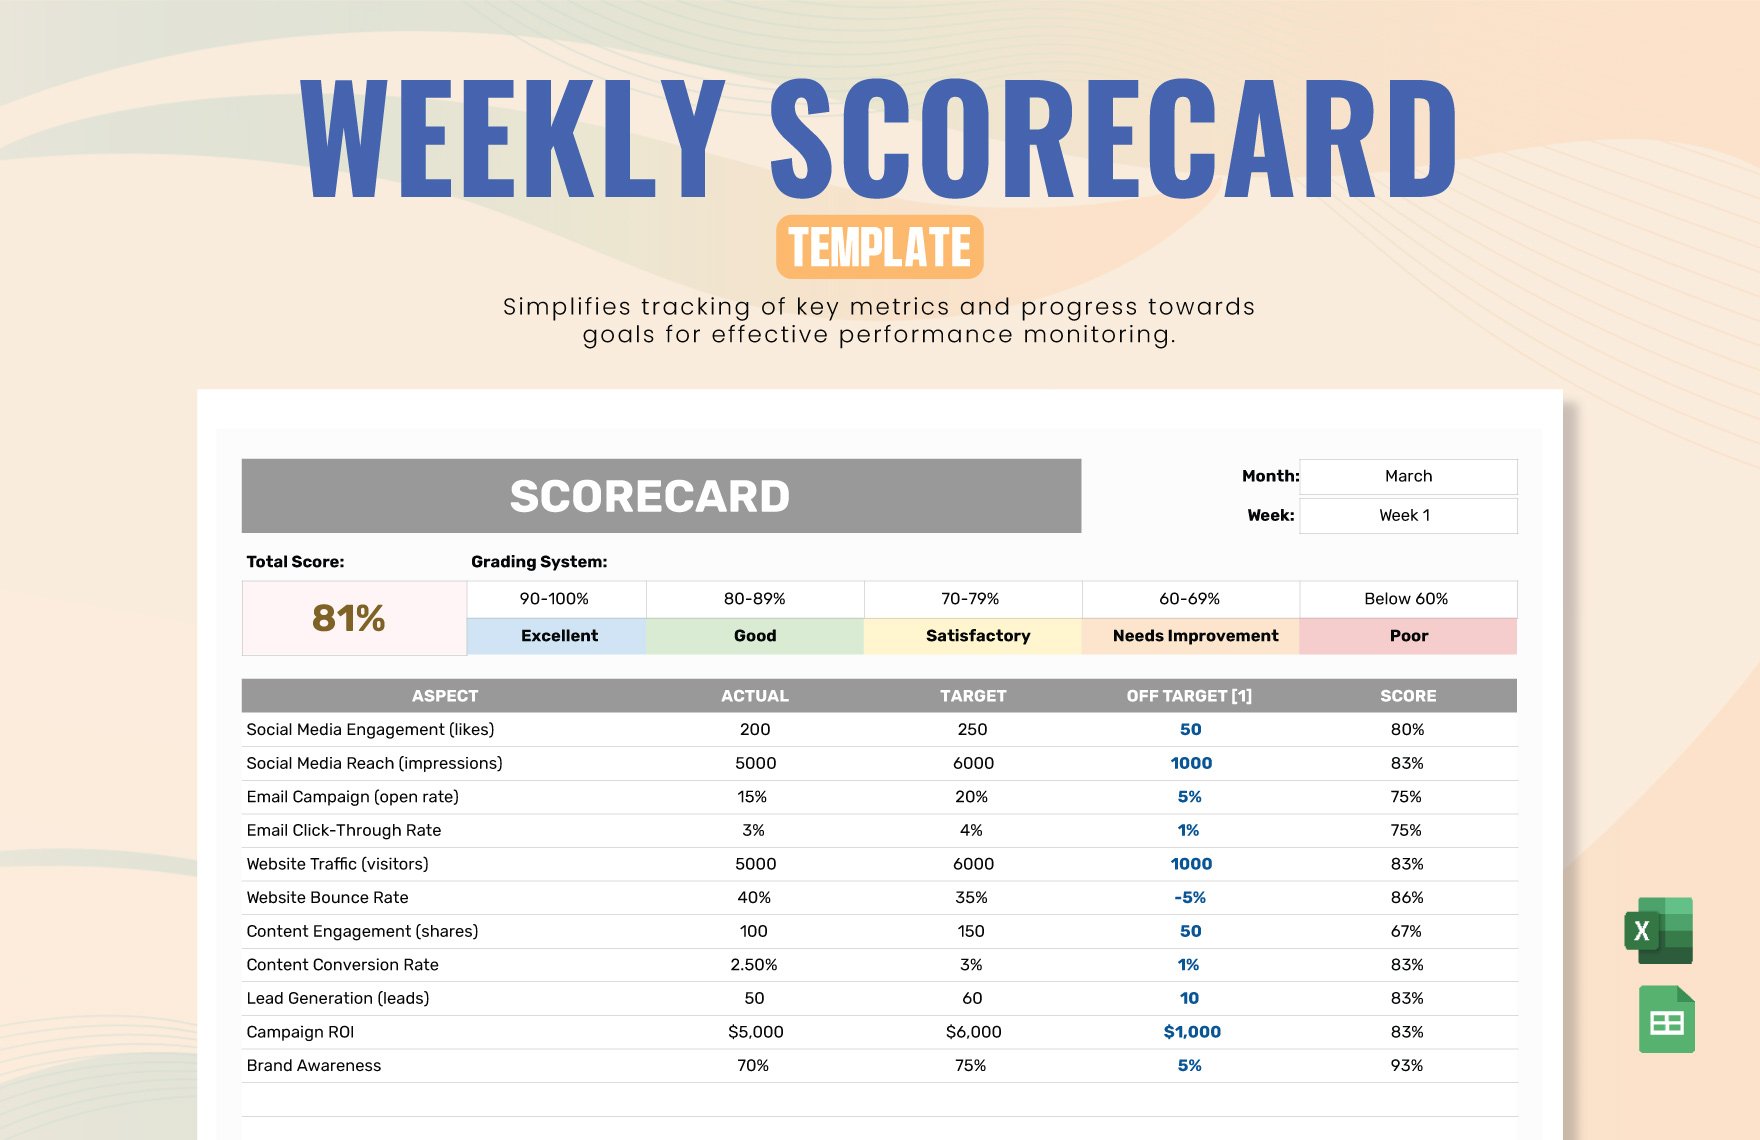 Weekly Scorecard Template in Excel, Google Sheets